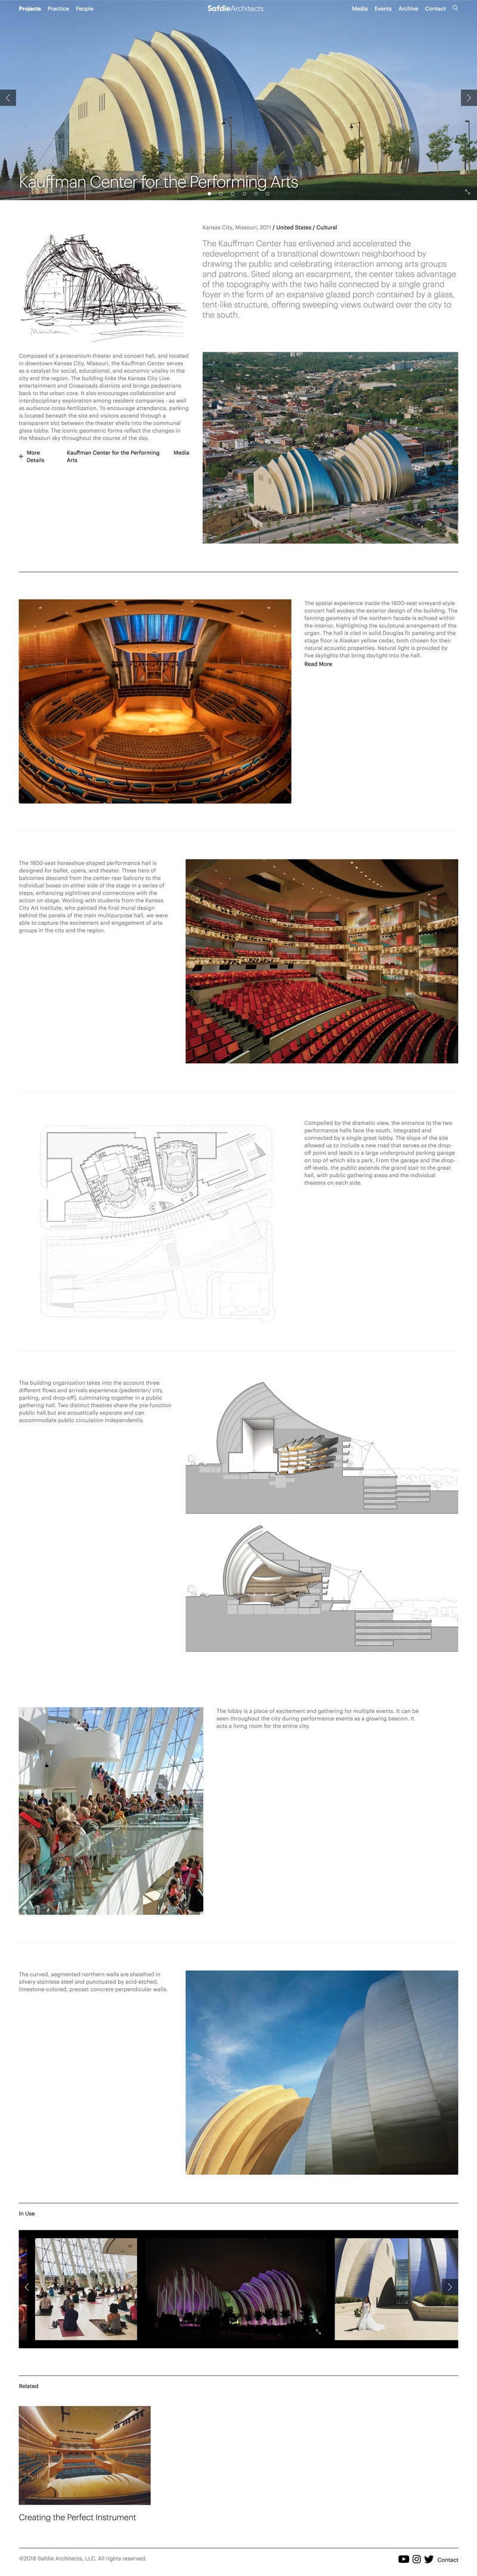 Case study example from Safdie Architects